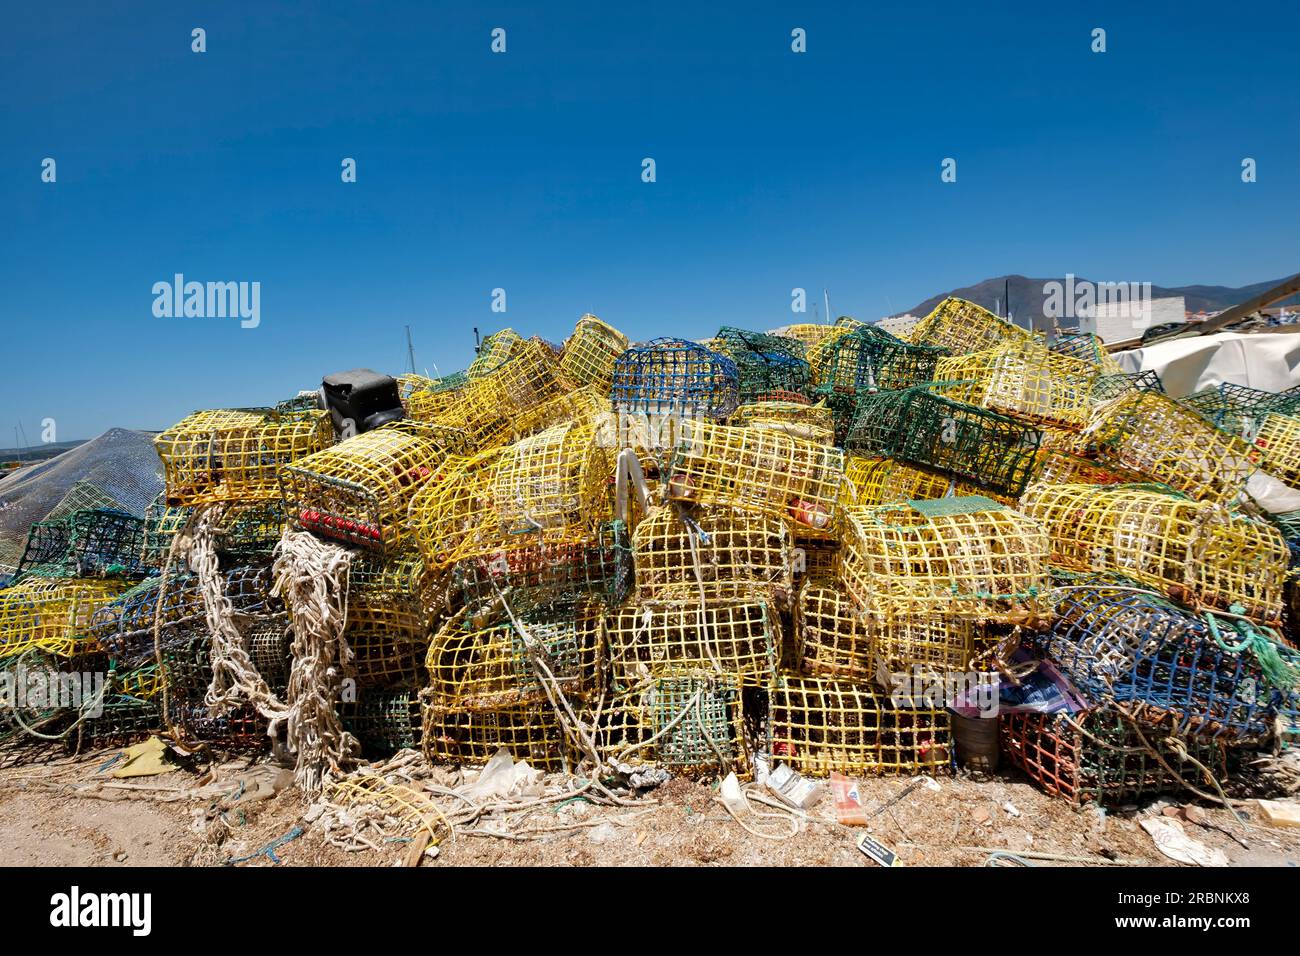 a stack of colourful plastic lobster and crab pots or baskets left to dry by fisherman  on the dockside of the old port, Estepona ,Spain Stock Photo